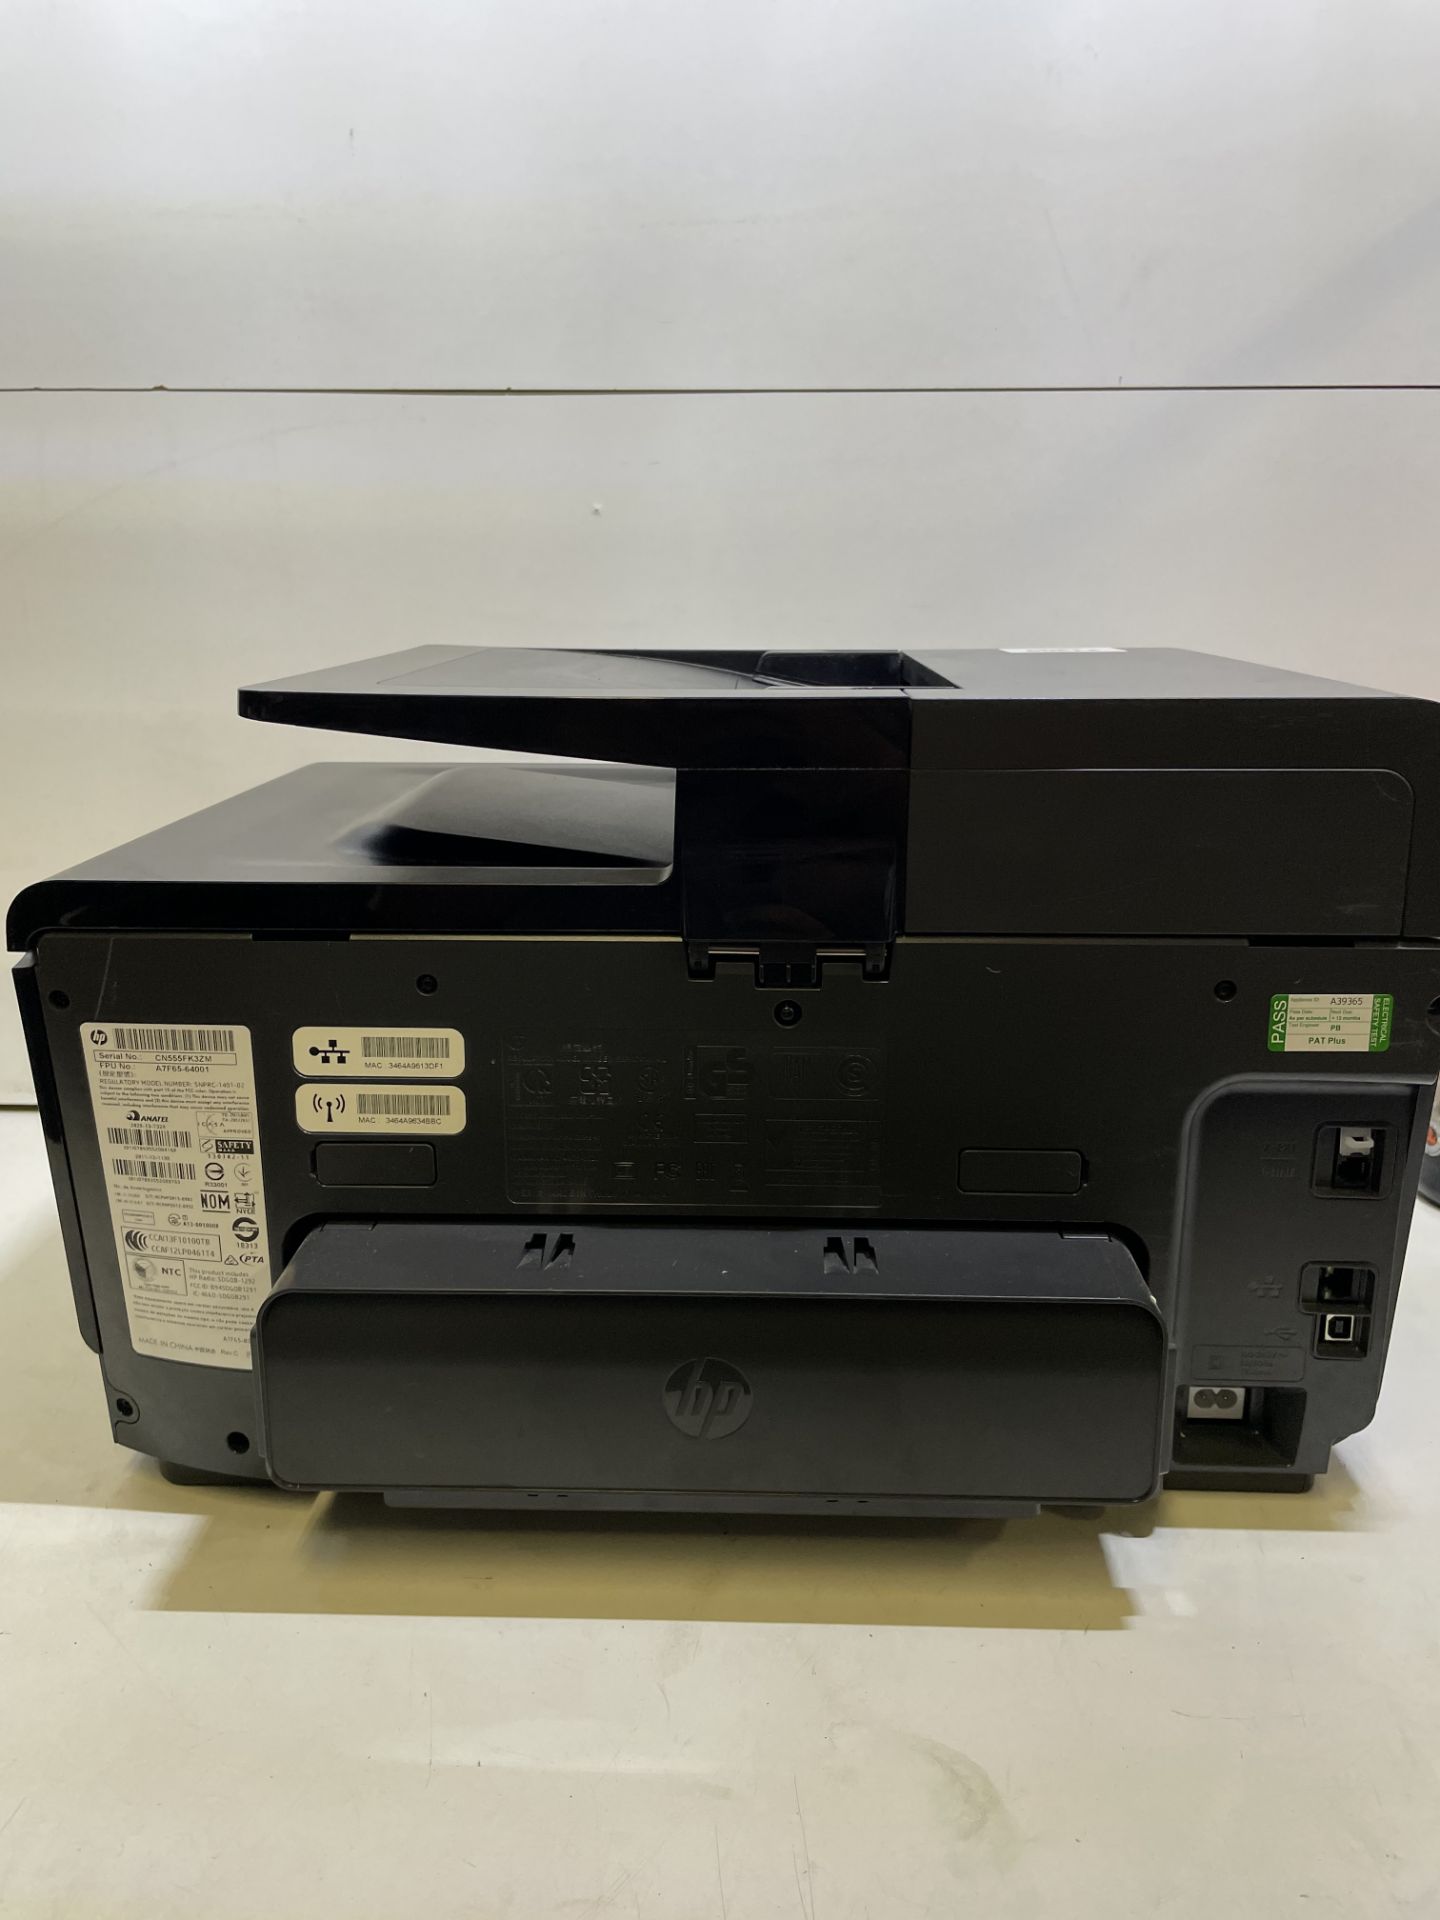 HP Officejet Pro 8620 e-All-in-One Printer - Image 3 of 4